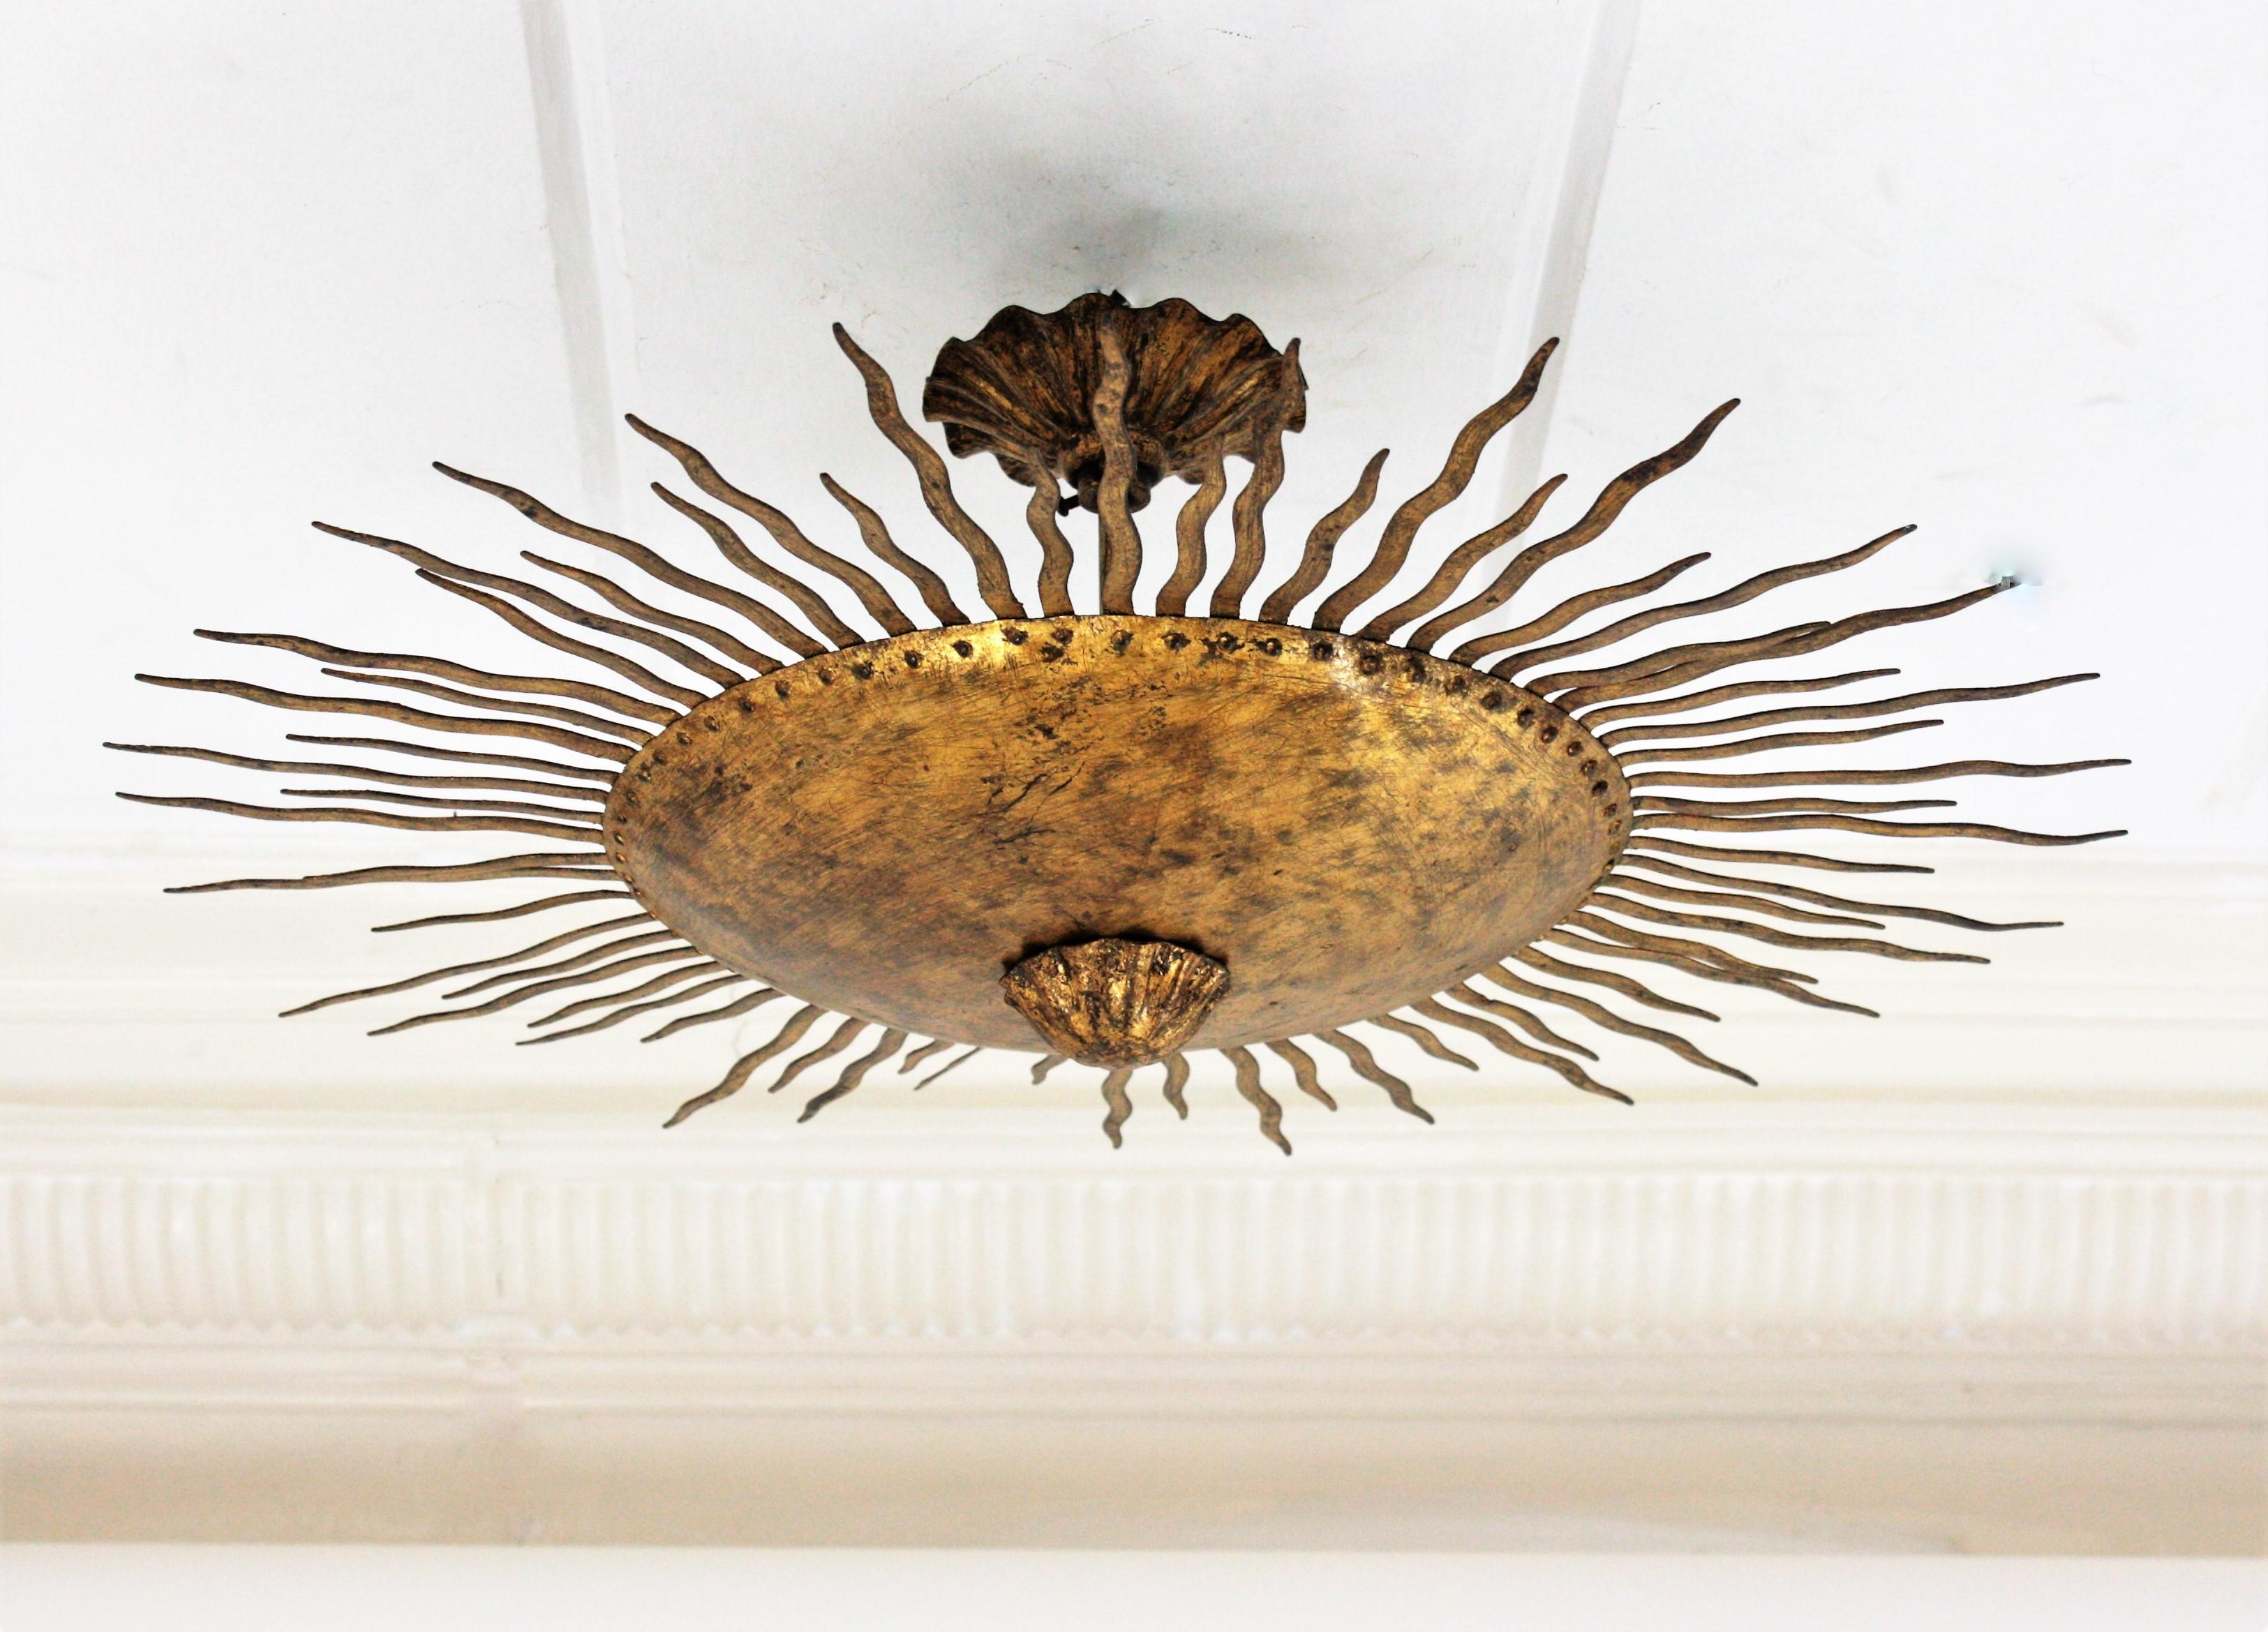 Sunburst Curly Ceiling Light Fixture / Chandelier in Gilt Iron In Good Condition For Sale In Barcelona, ES